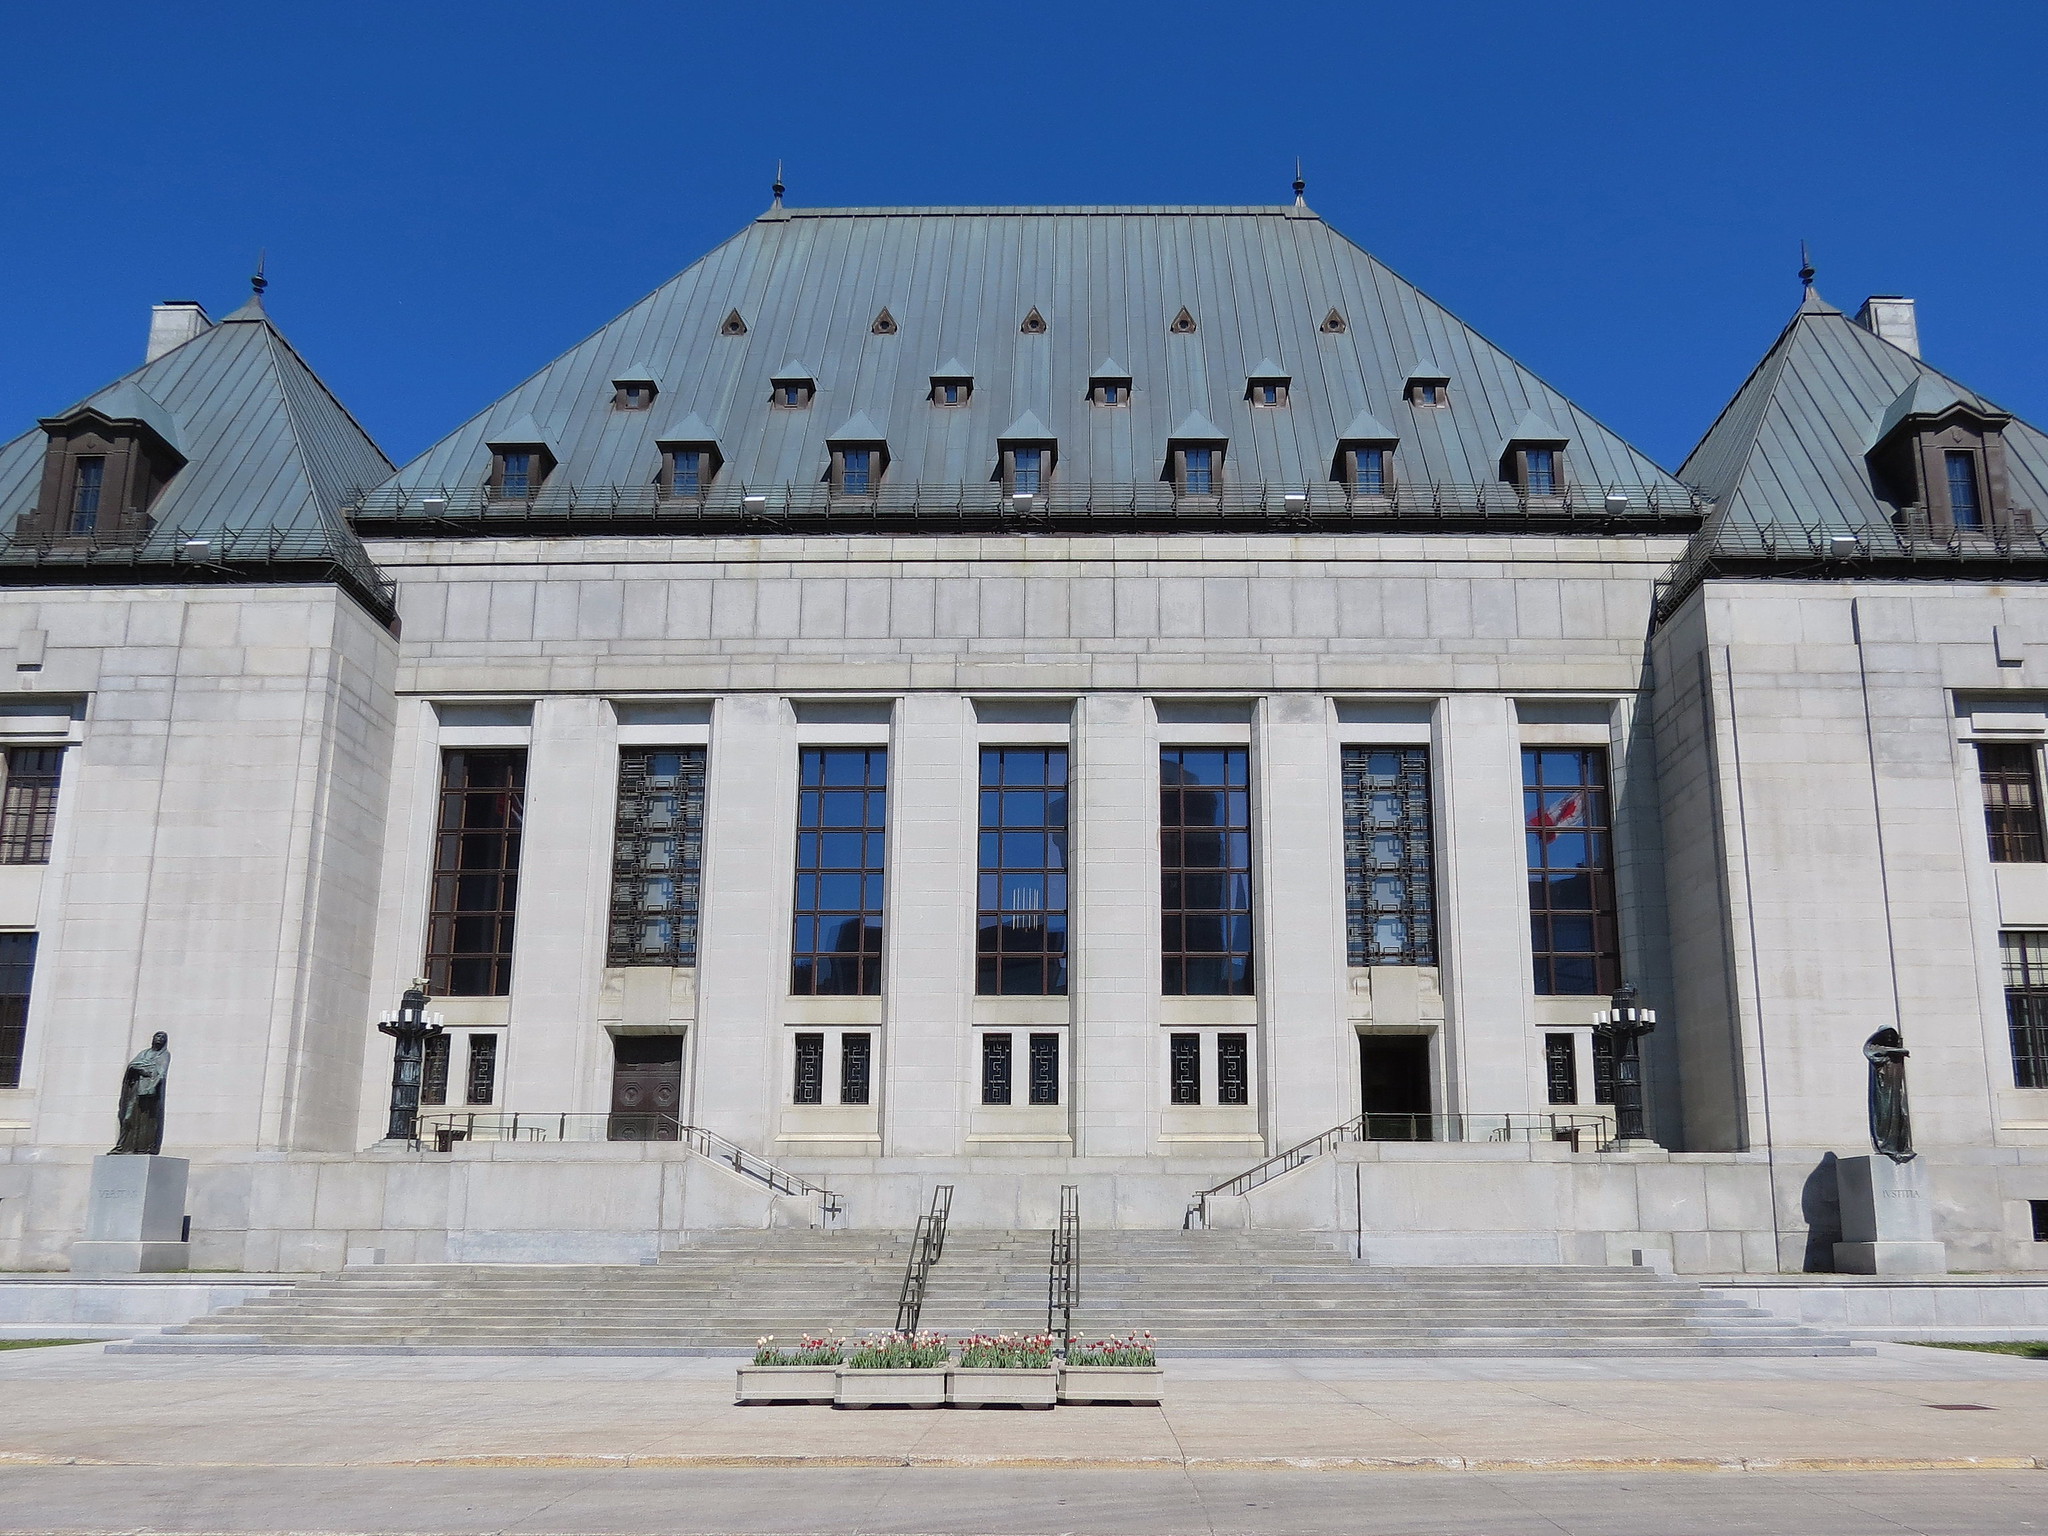 Supreme Court of Canada. Image by Robert Linsdell.